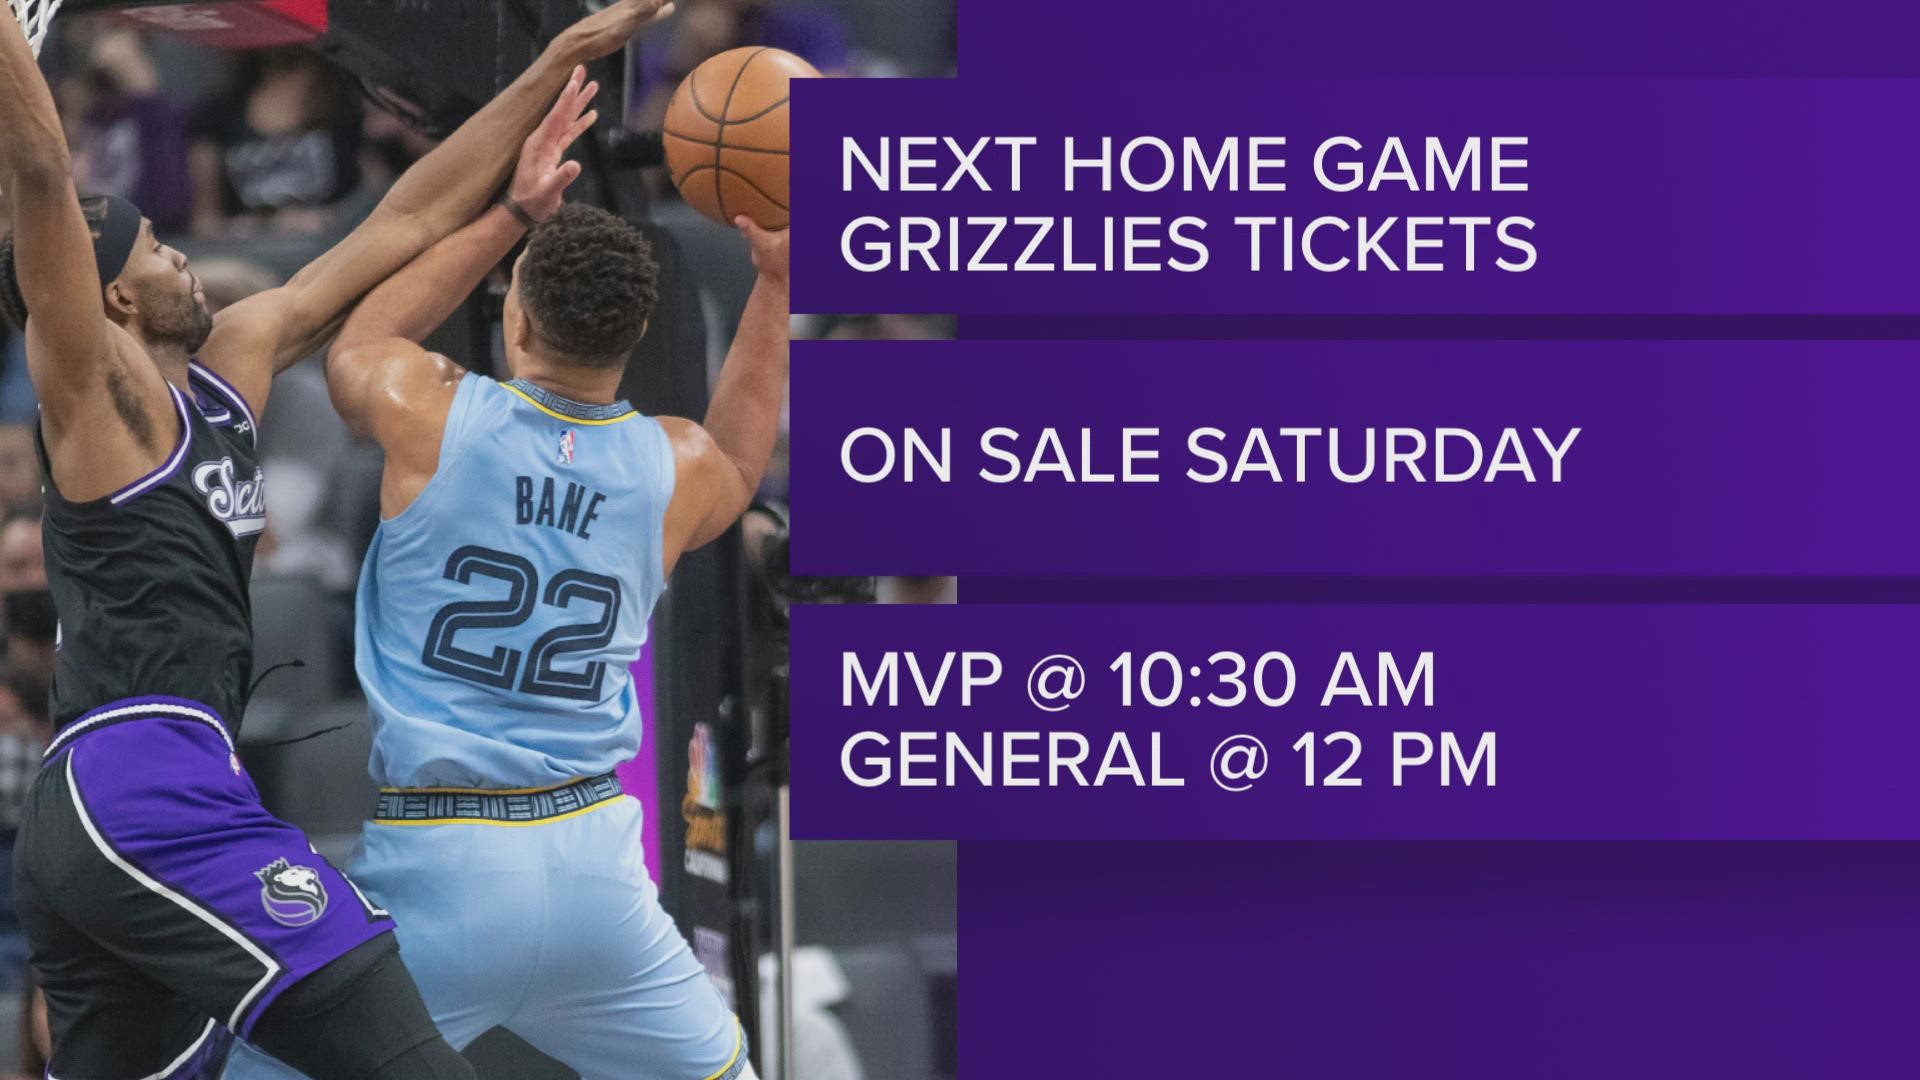 The Grizzlies announced tickets will go on sale starting Saturday, April 30, either for Game 7 against the Timberwolves or Game 1 against the Golden State Warriors.